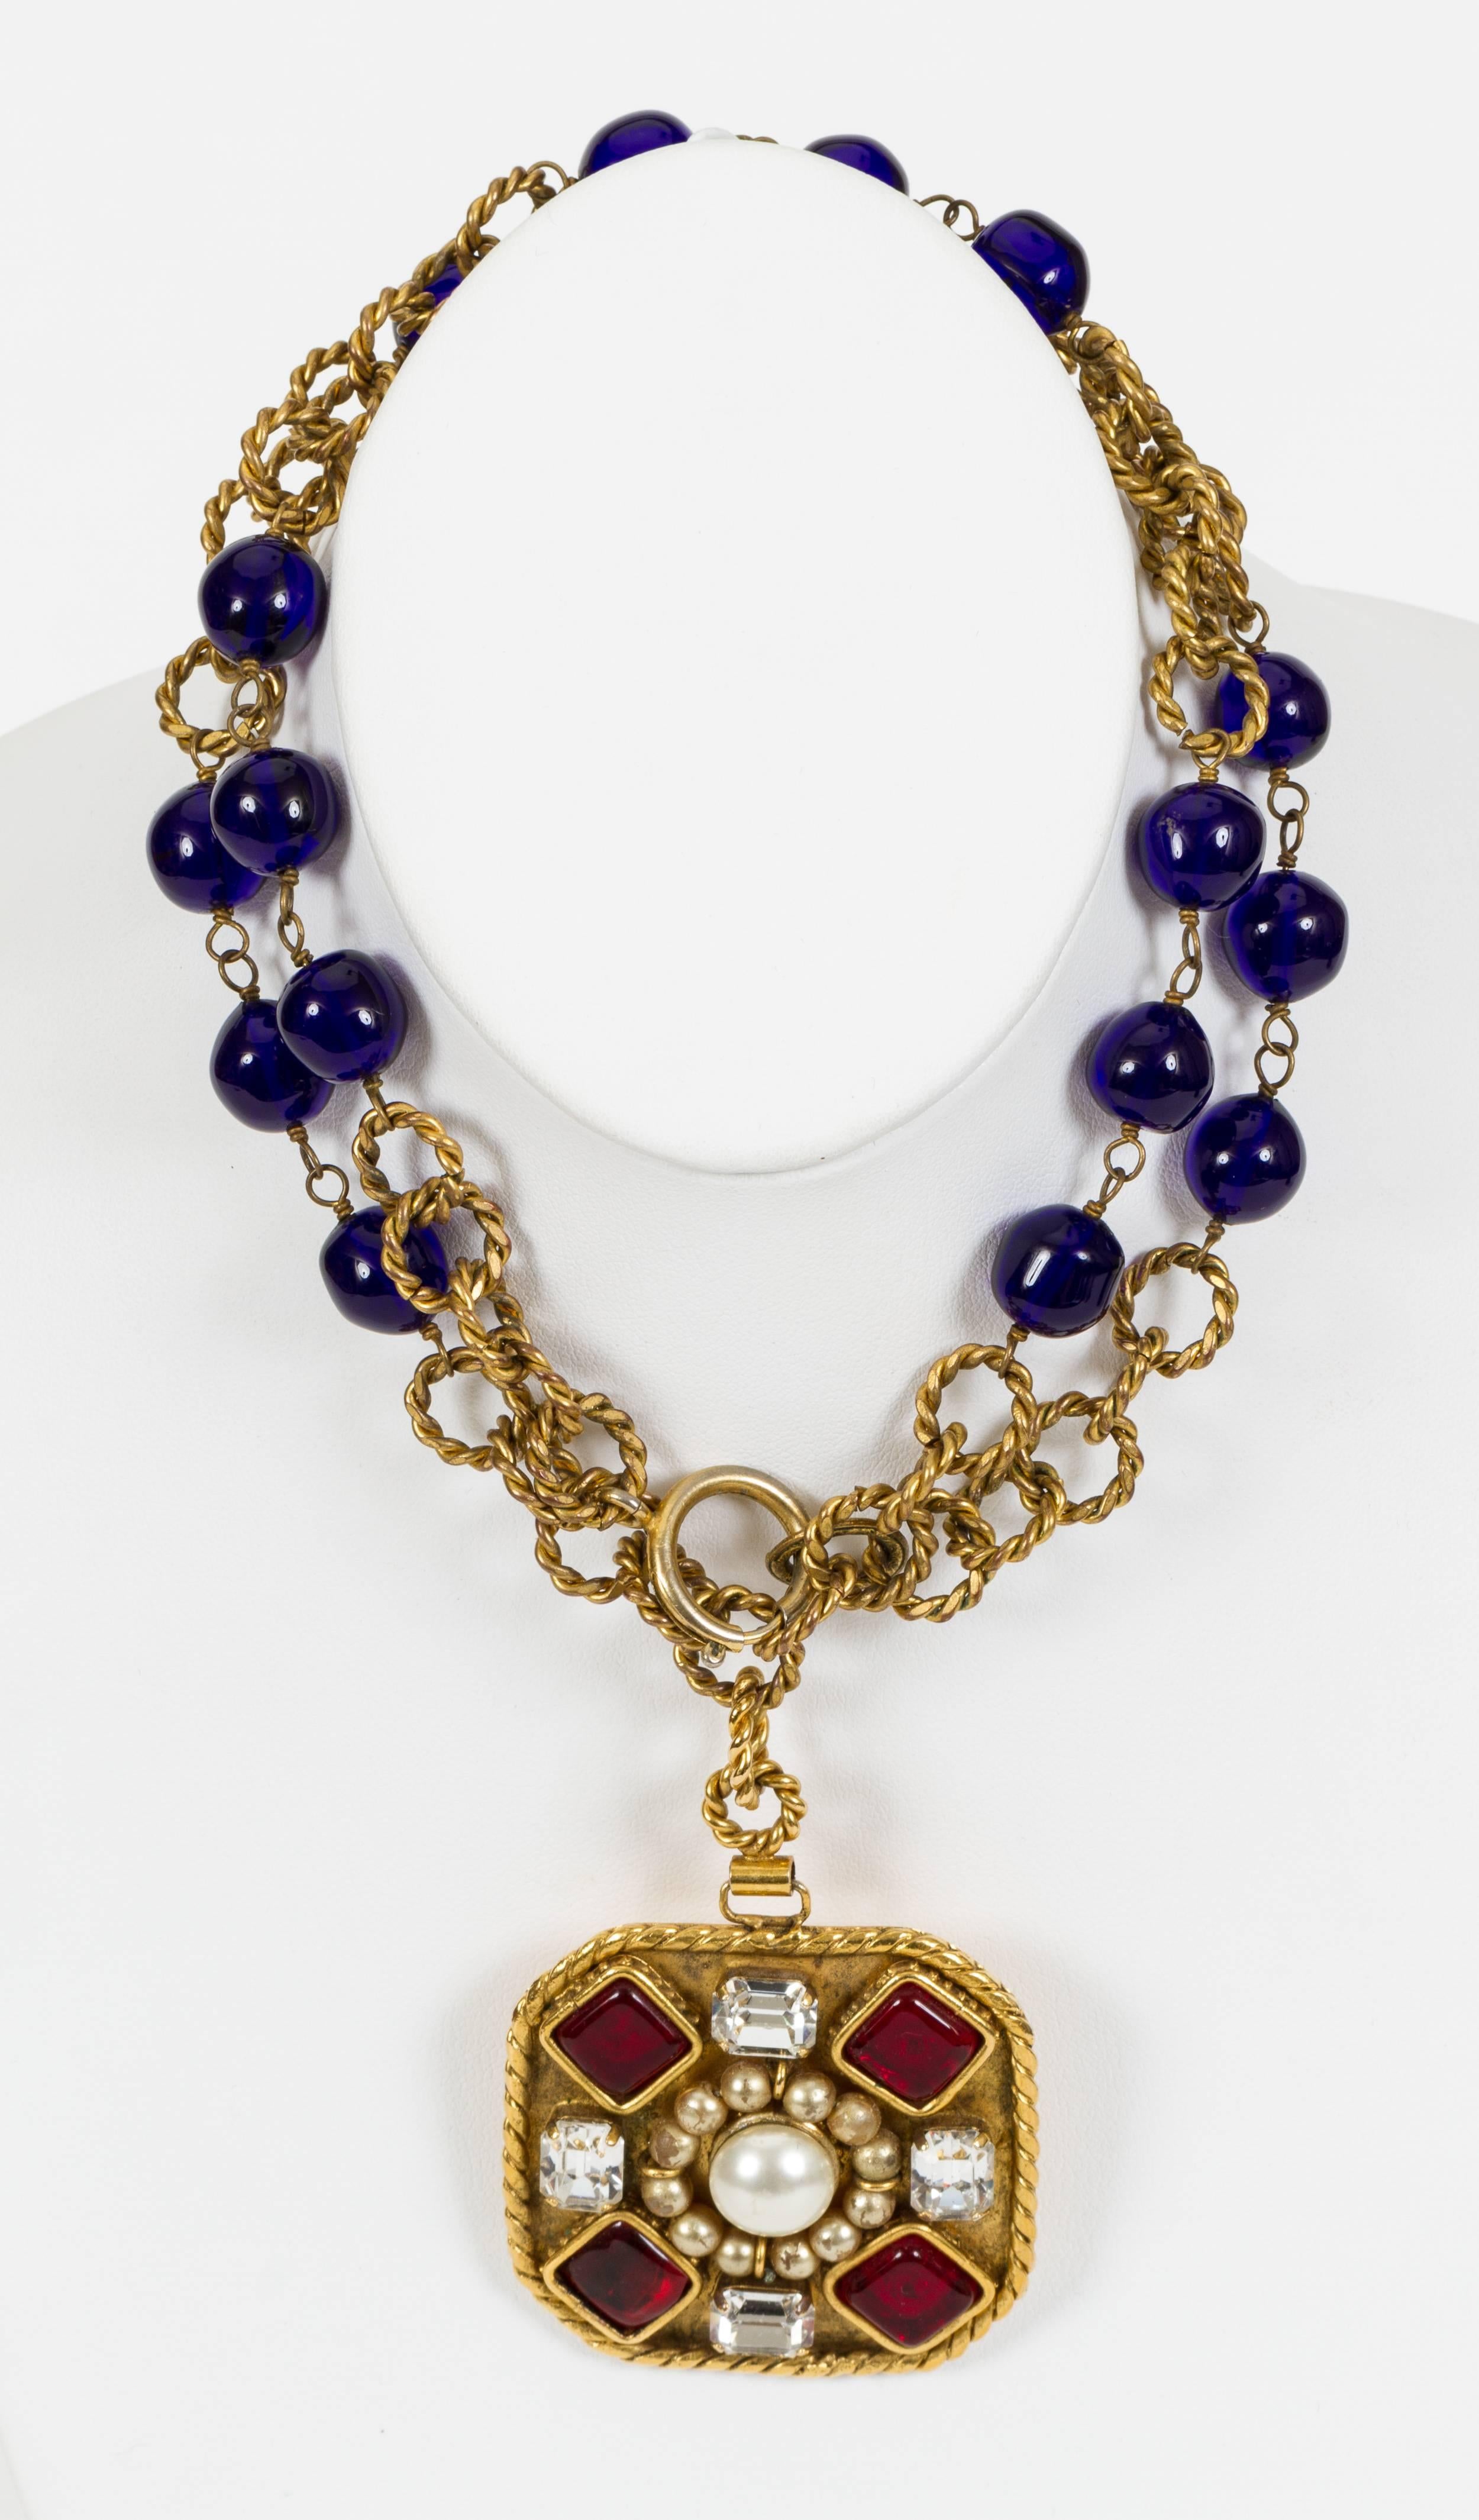 Women's Chanel Gripoix & Crystals Long Necklace